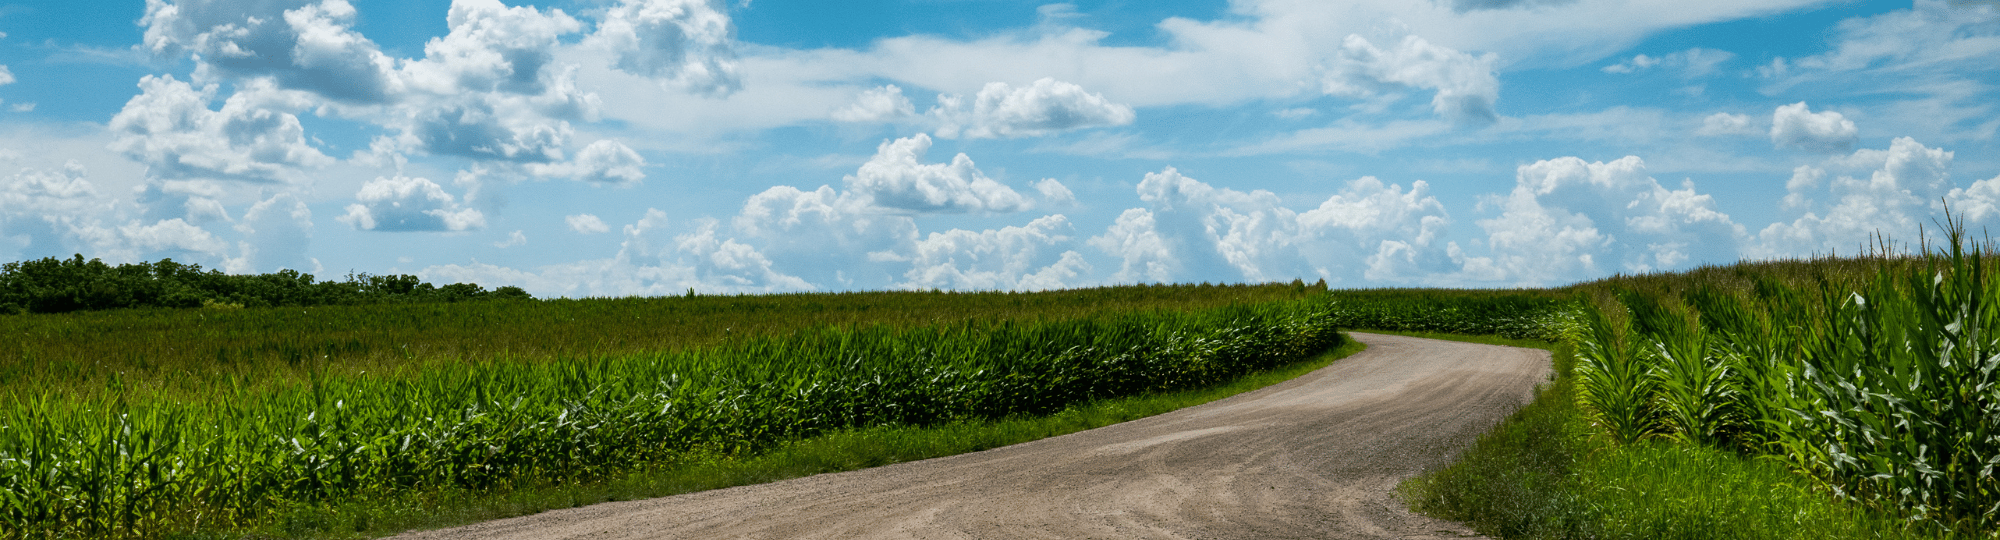 Unpaved road between two corn fields with blue sky